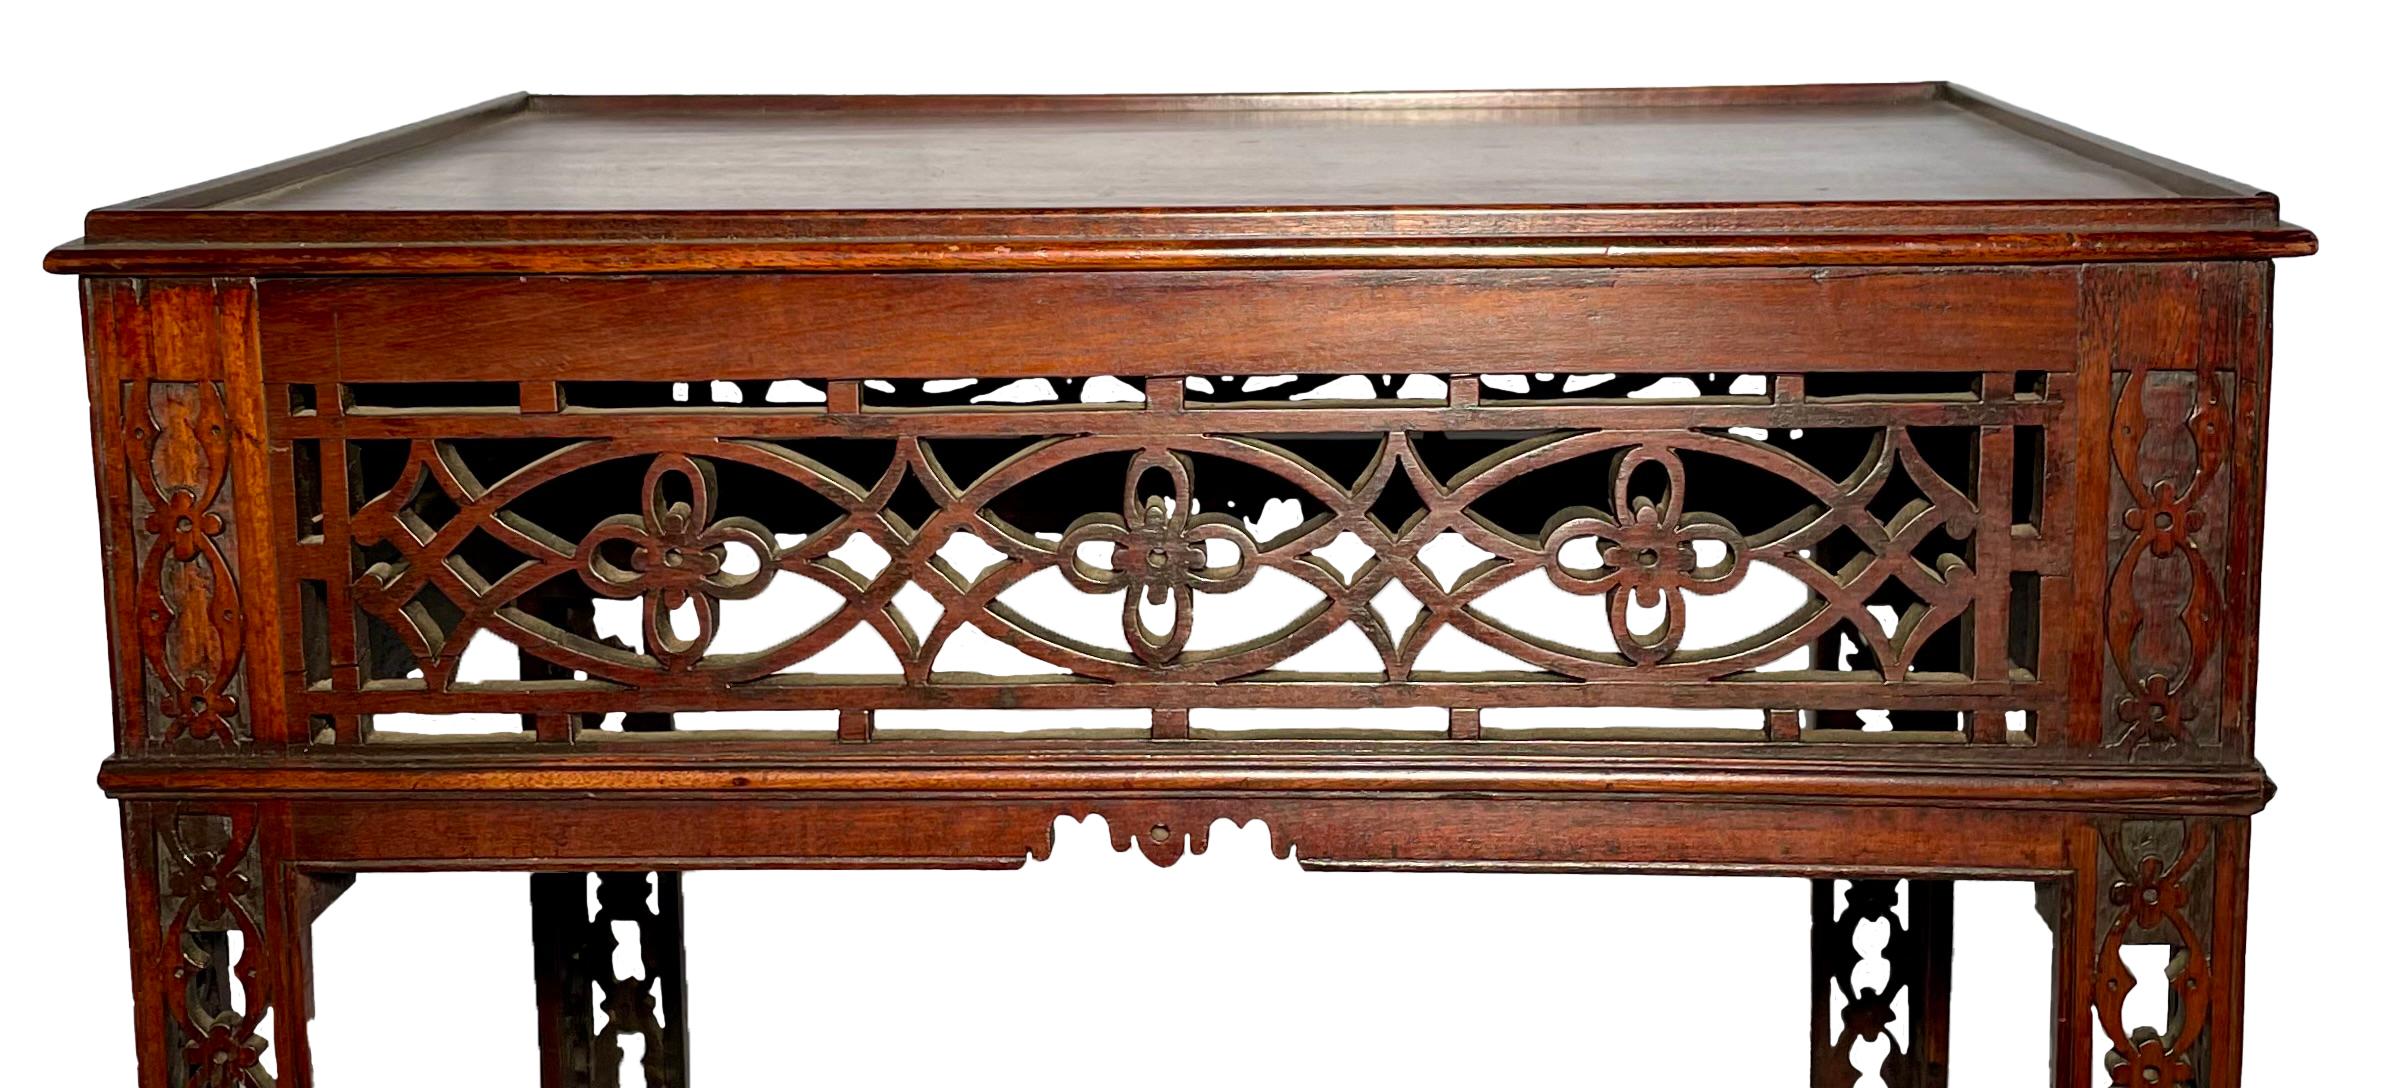 Antique English Mahogany Tea Table with Chippendale Fretwork, Circa 1880. For Sale 1